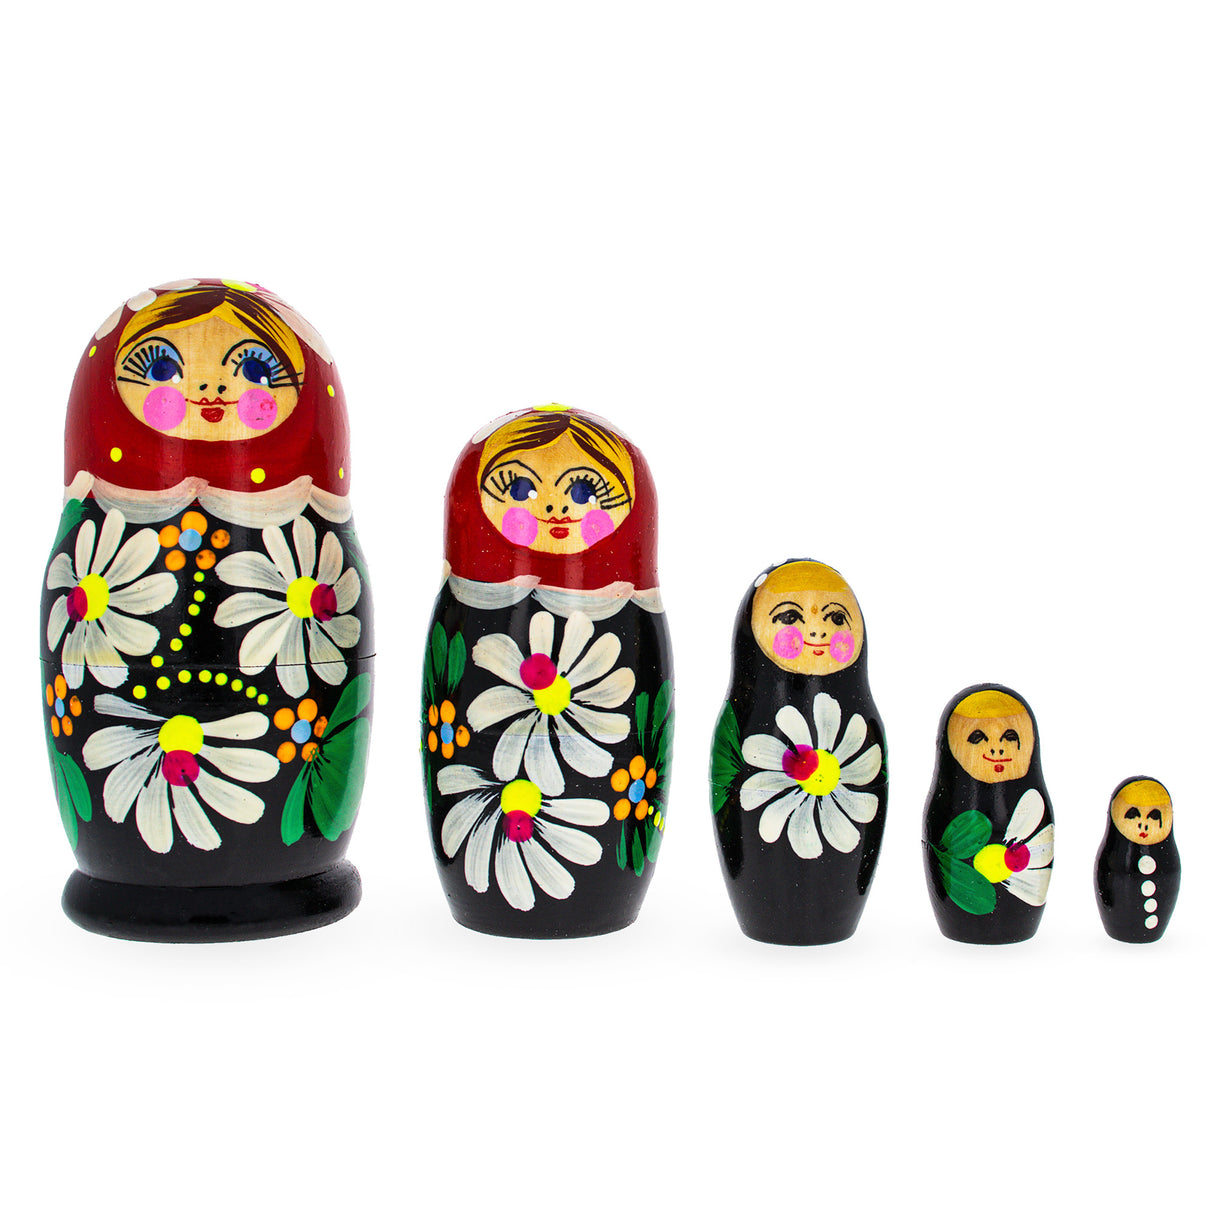 Wood Beautiful Wooden  with Red Color Hood and White Flowers Nesting Dolls in Multi color